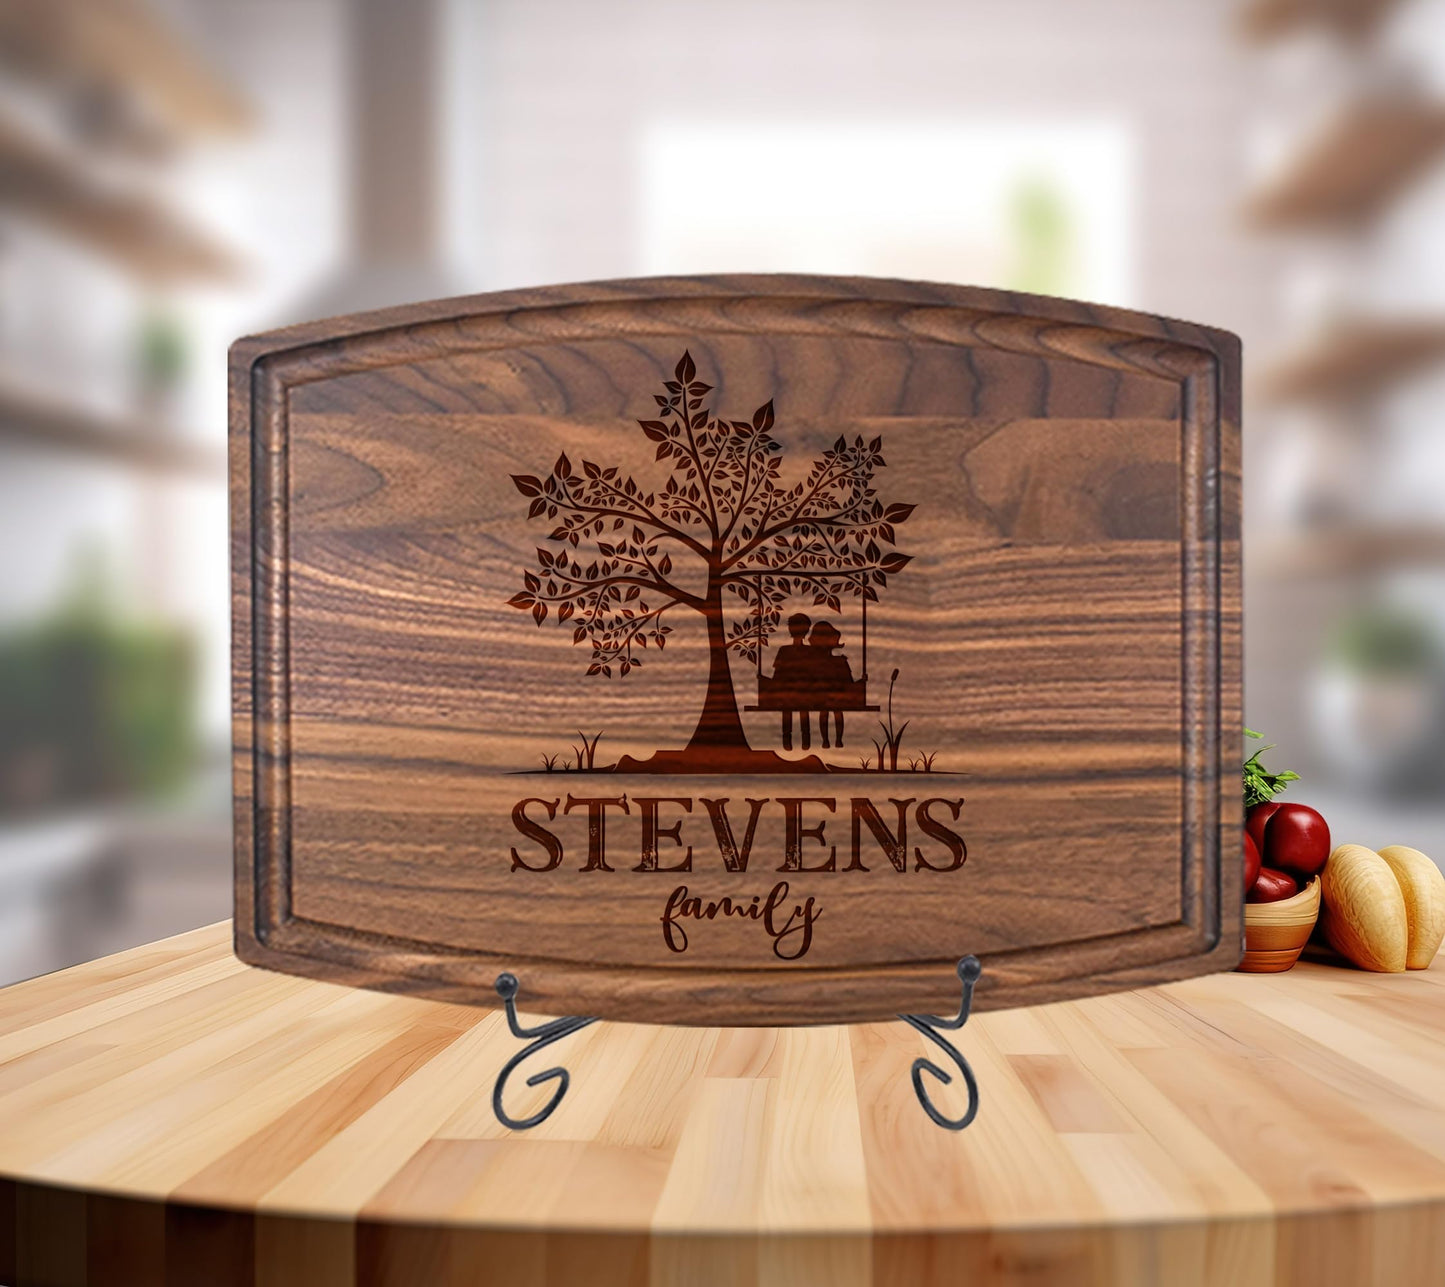 Silverhill Design Custom Wood Cutting Board Gift:Perfect Wedding & Anniversaries! Personalized Charcuterie Cheese Board for Couples, Friends, &